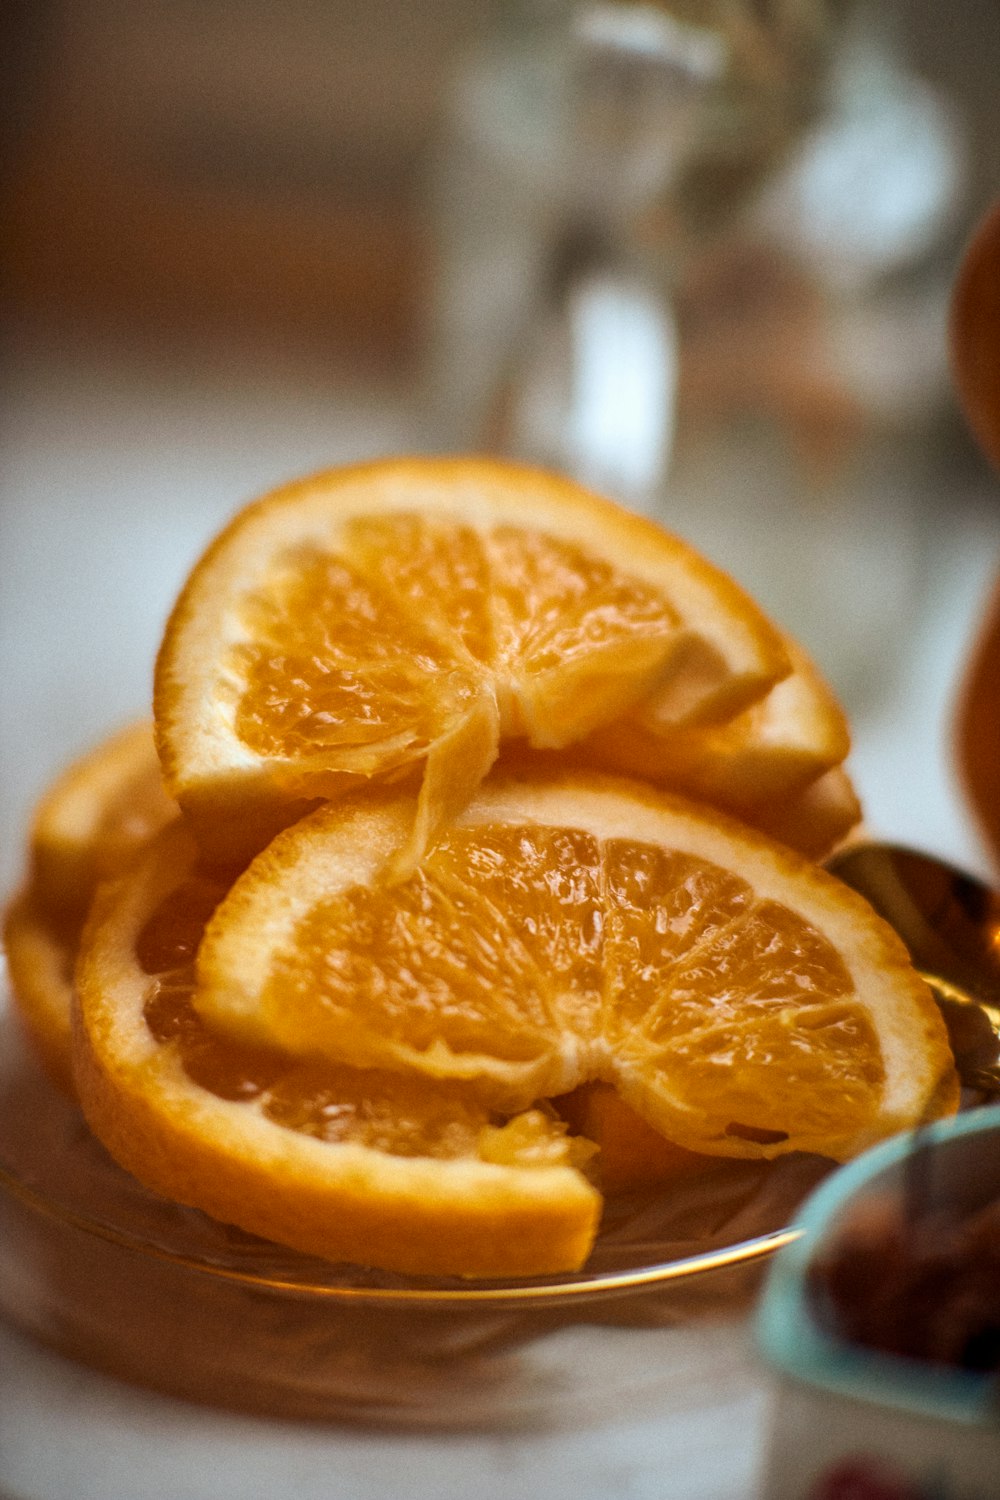 a plate of sliced oranges